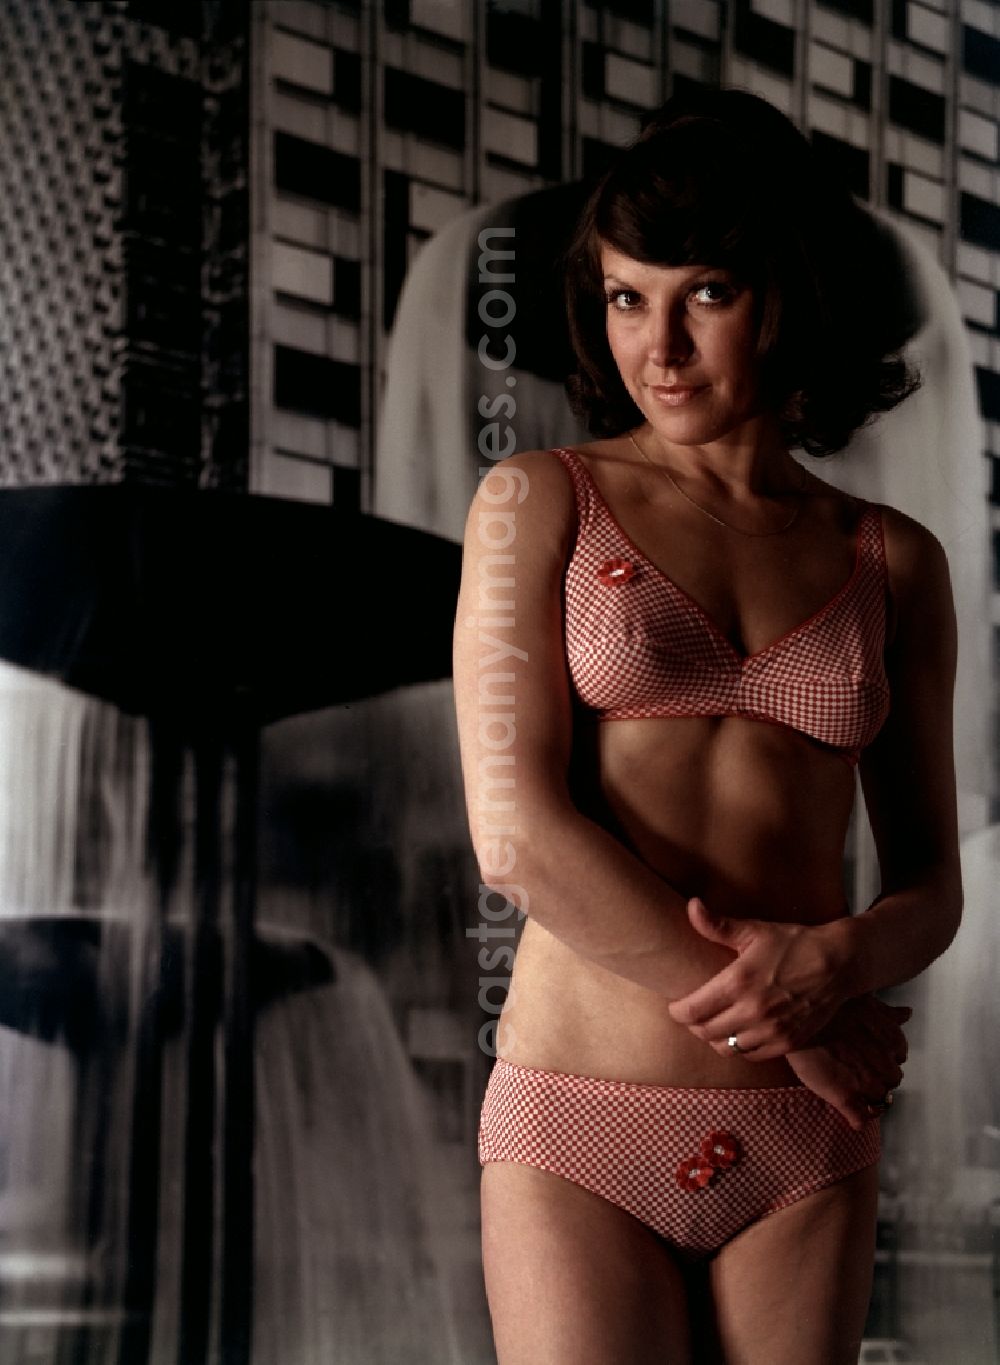 GDR photo archive: Pirna - Young models woman presents current women's fashion collection with women's underwear in Pirna in the state Saxony on the territory of the former GDR, German Democratic Republic